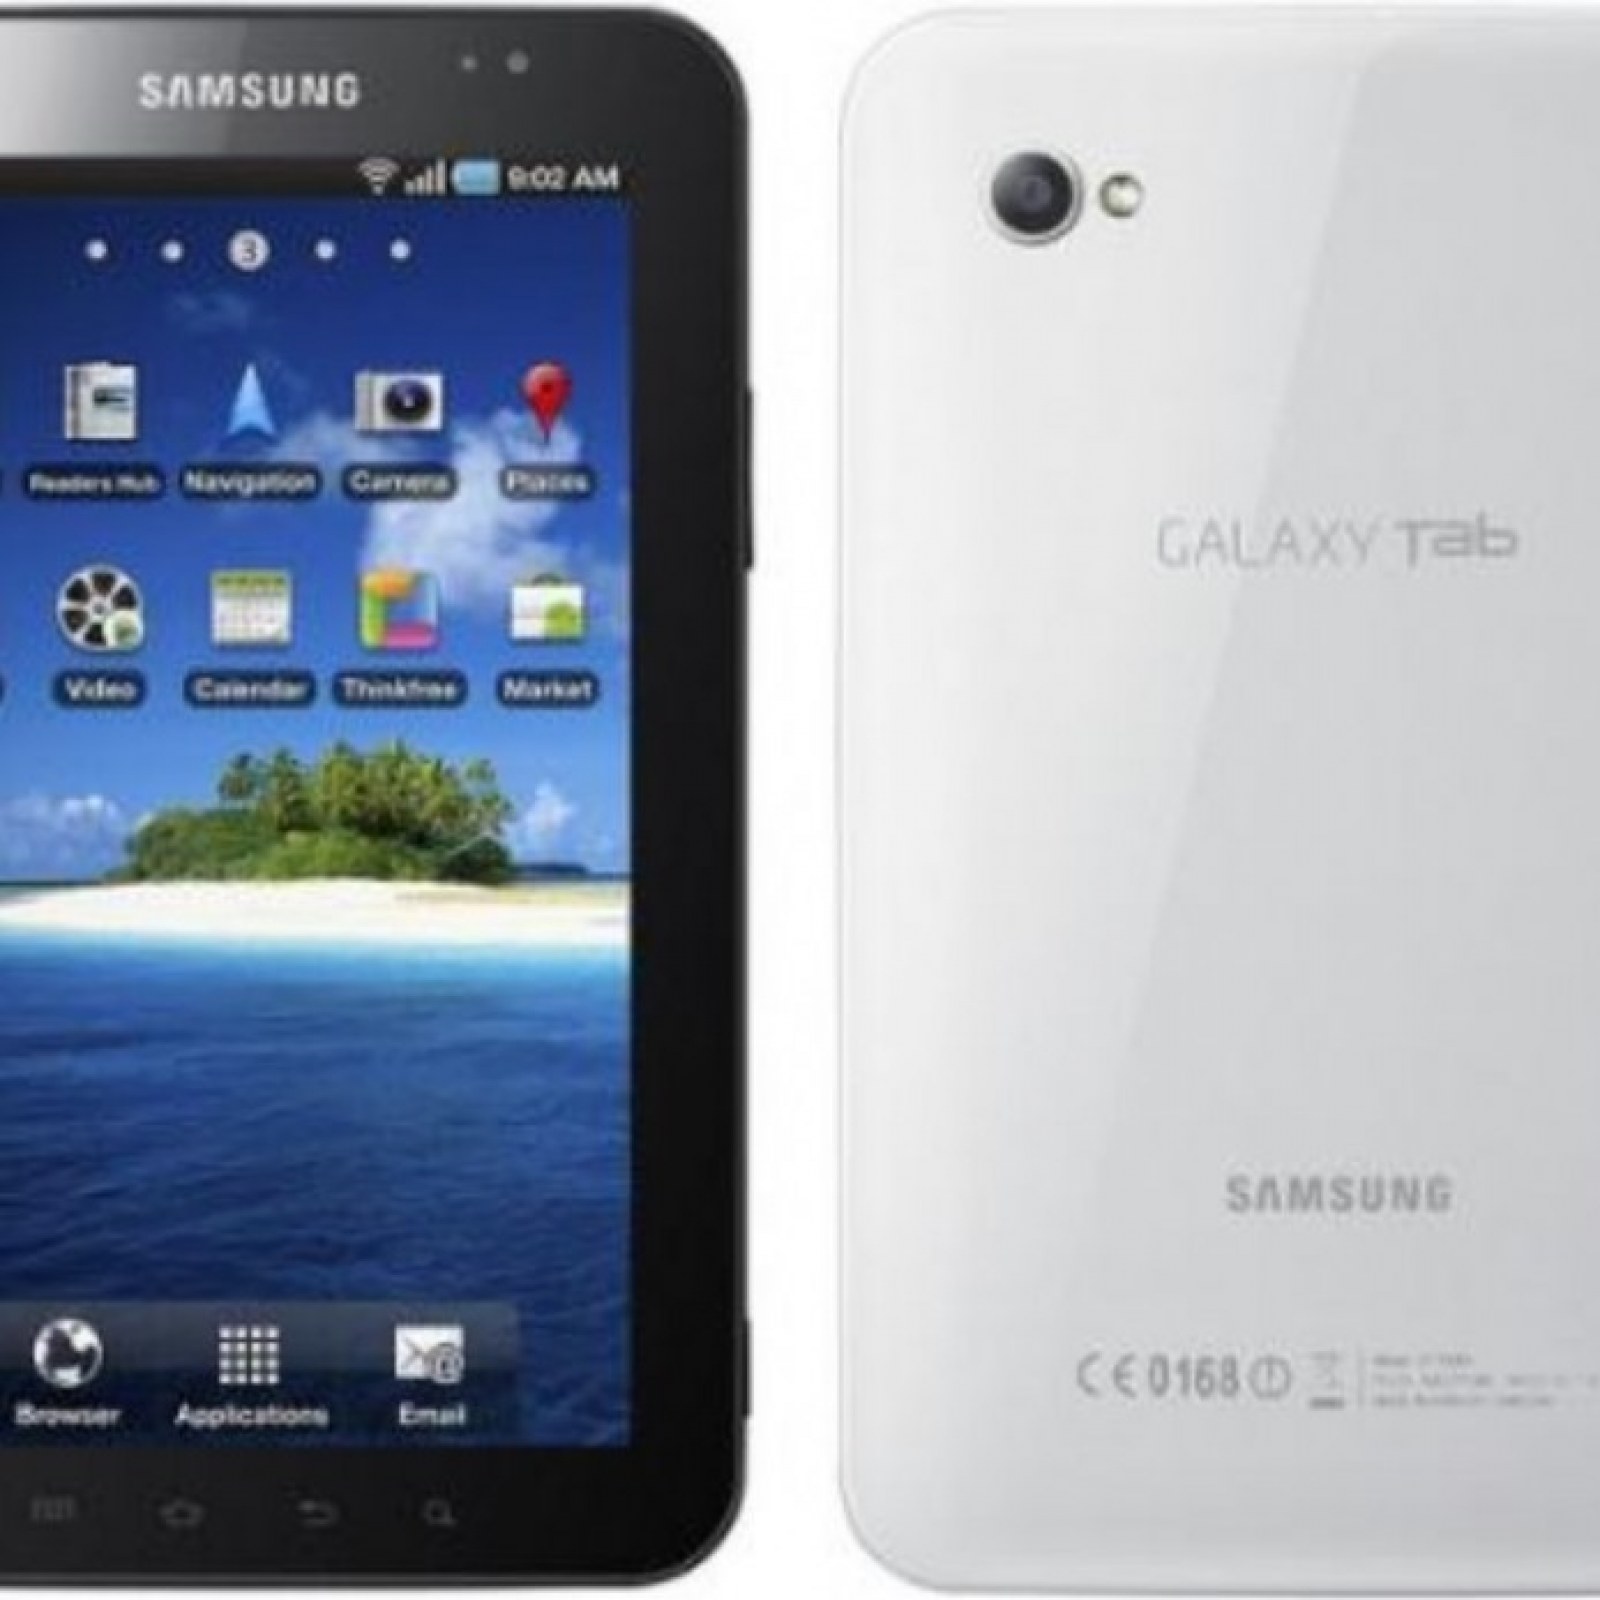 Religious Appendix bundle Galaxy Tab 7 GT-P1000 Receives Android 4.2.2 Jelly Bean Update via CyanogenMod  10.1 Nightly ROM [How to Install]